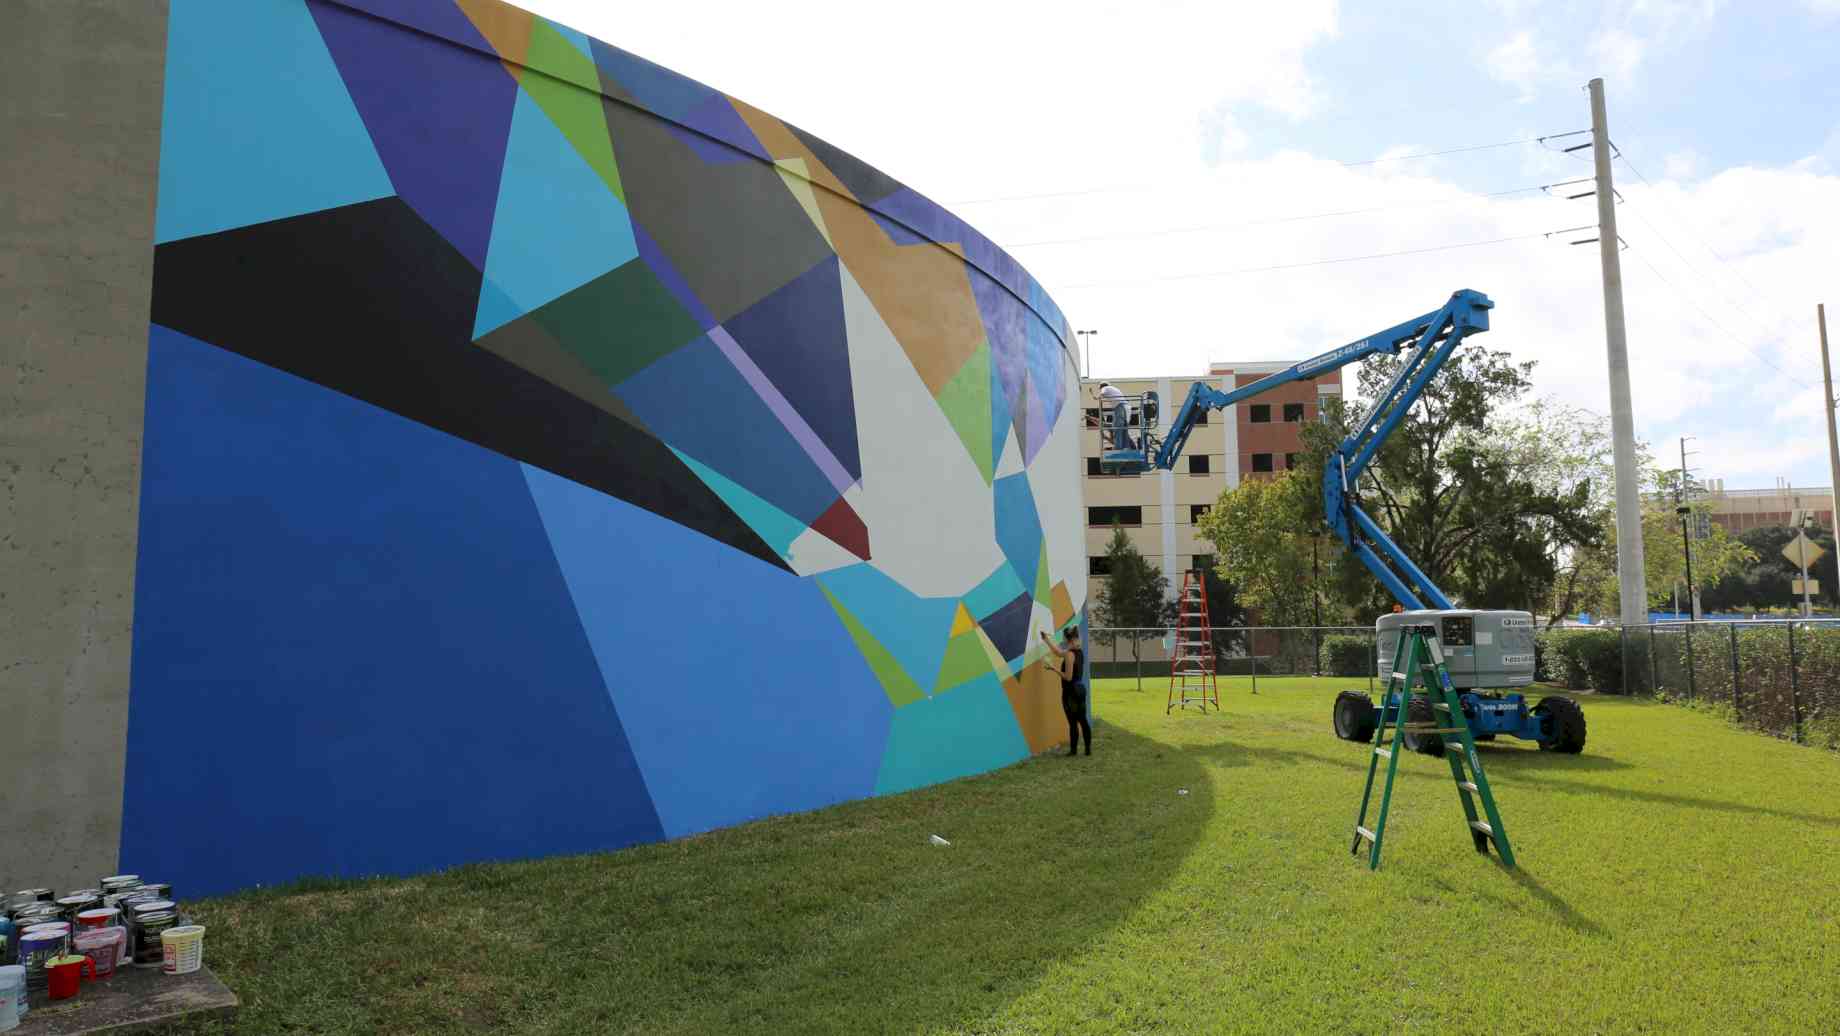 Mural painting on campus